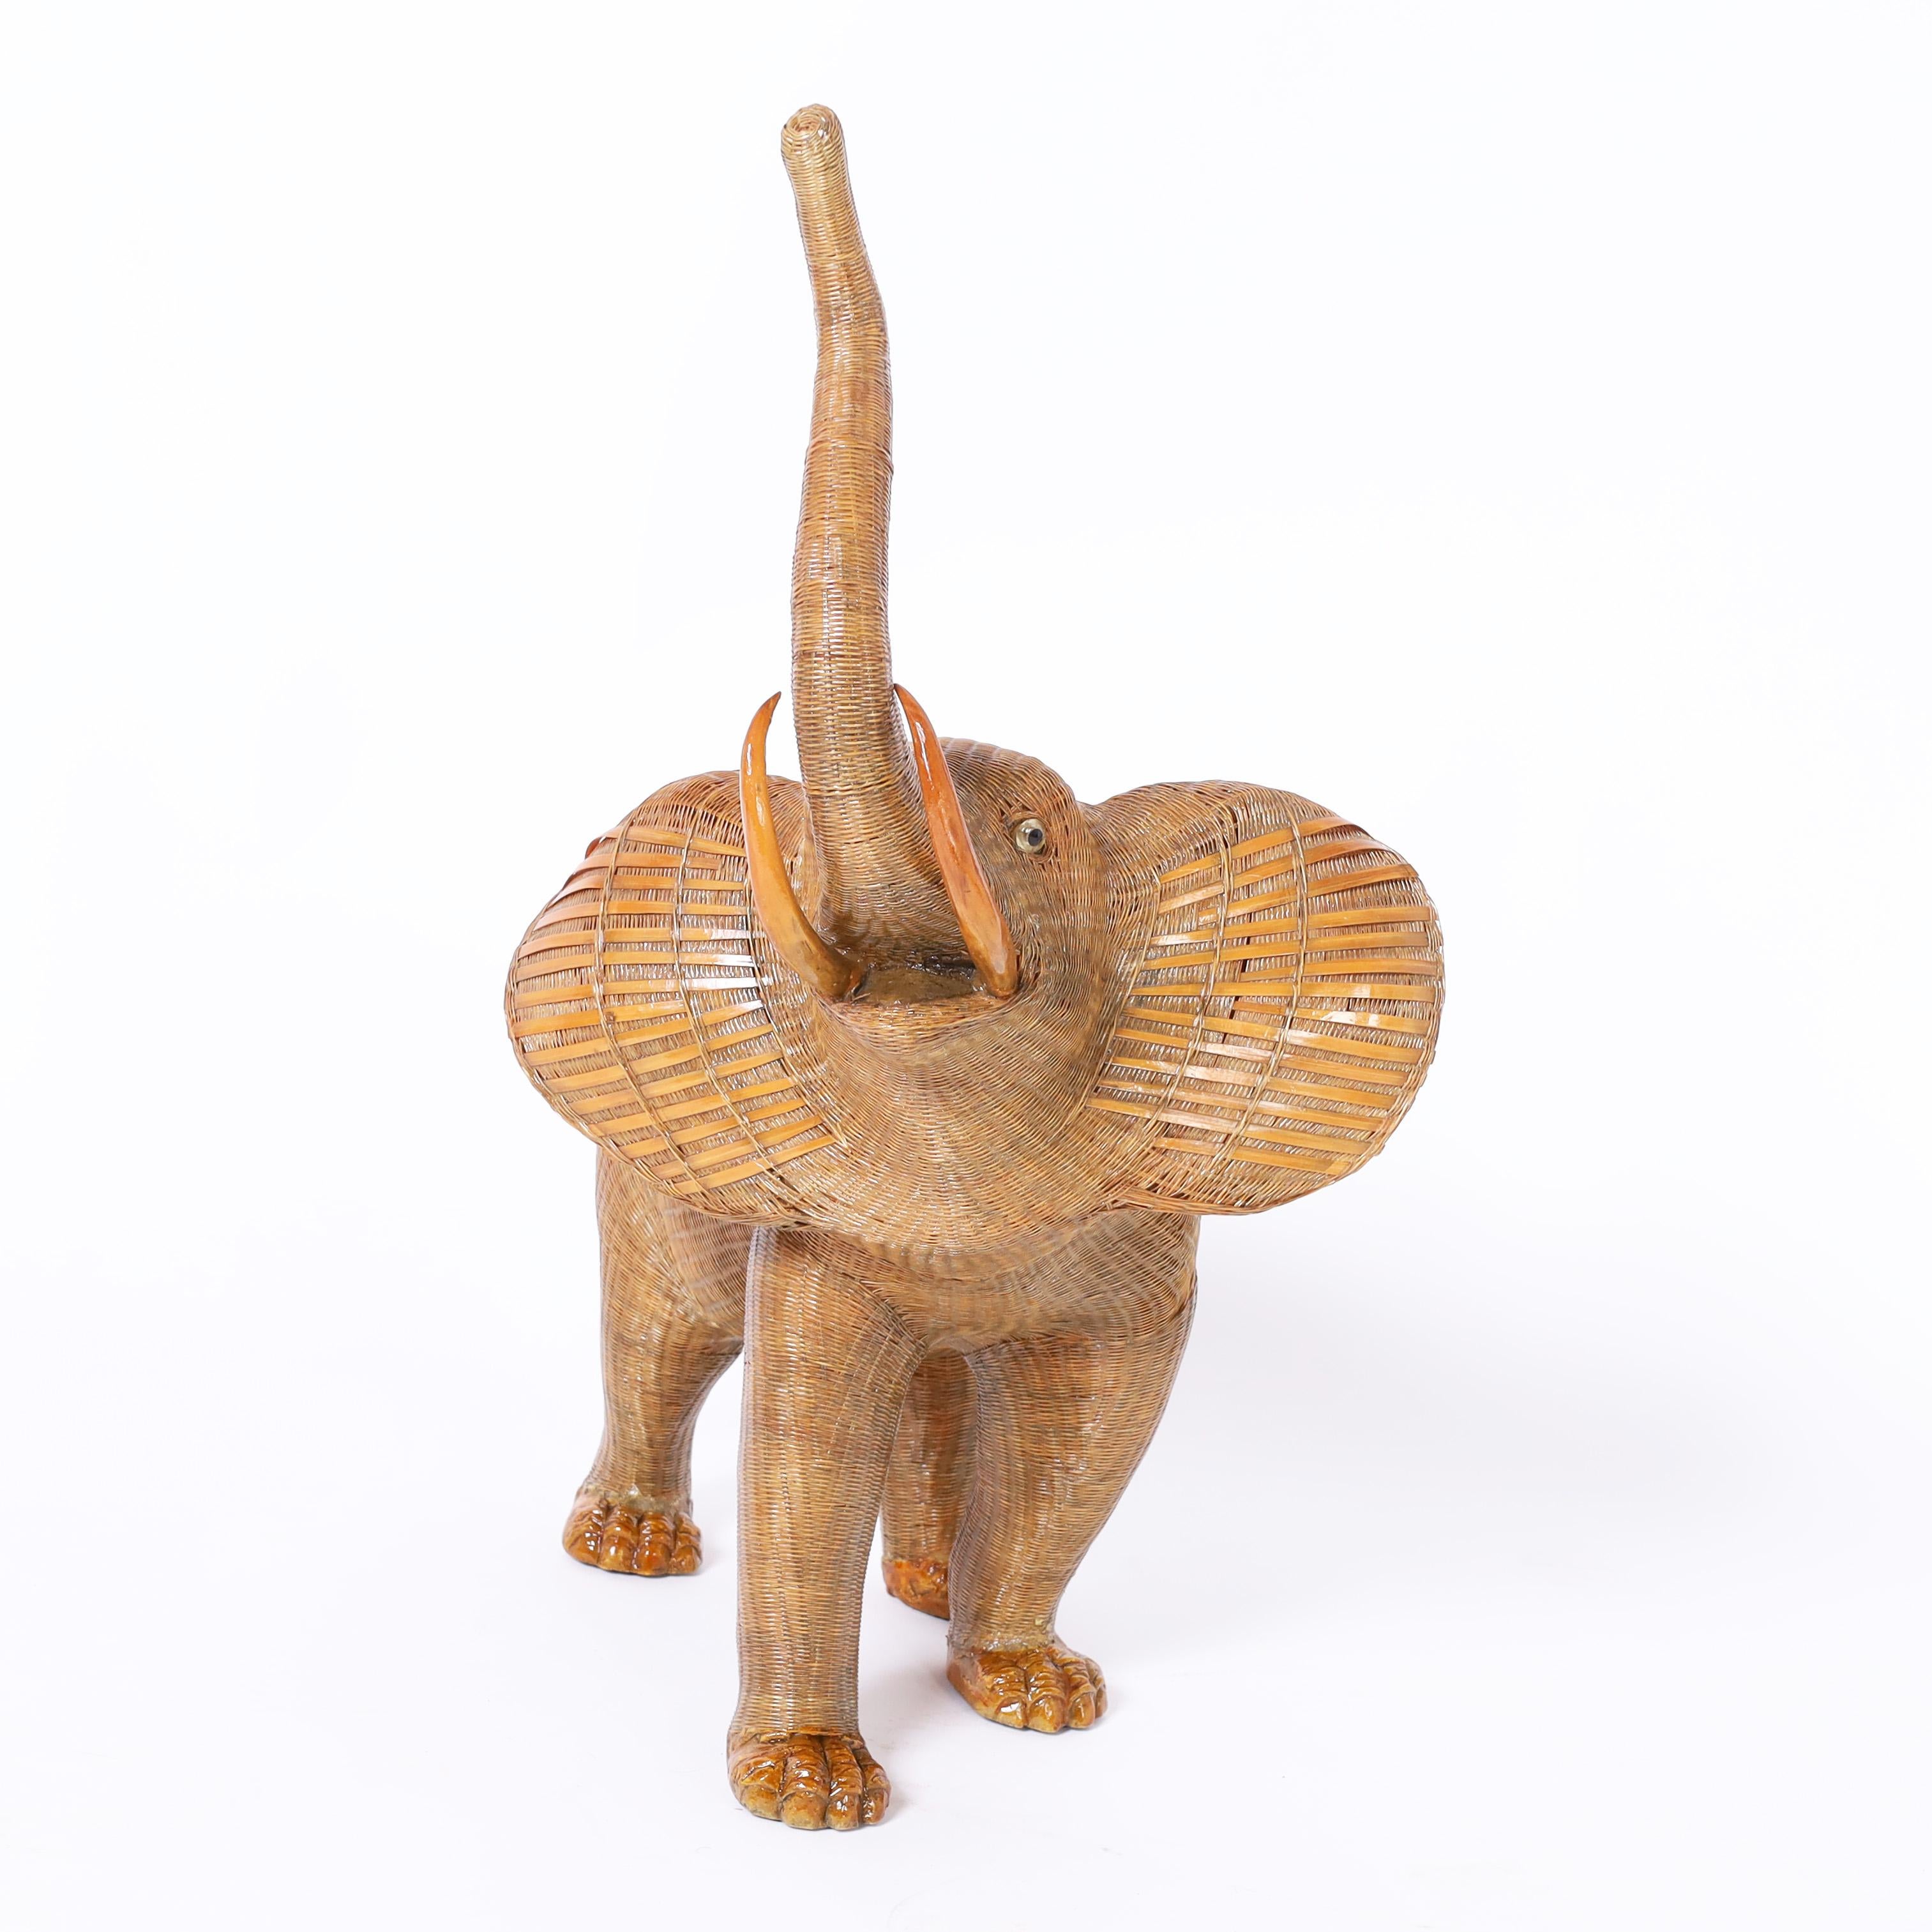 Vintage Chinese elephant sculpture ambitiously hand crafted in woven wicker with rattan and wood highlights, having a removable head as a lid. From the famed Shanghai collection.